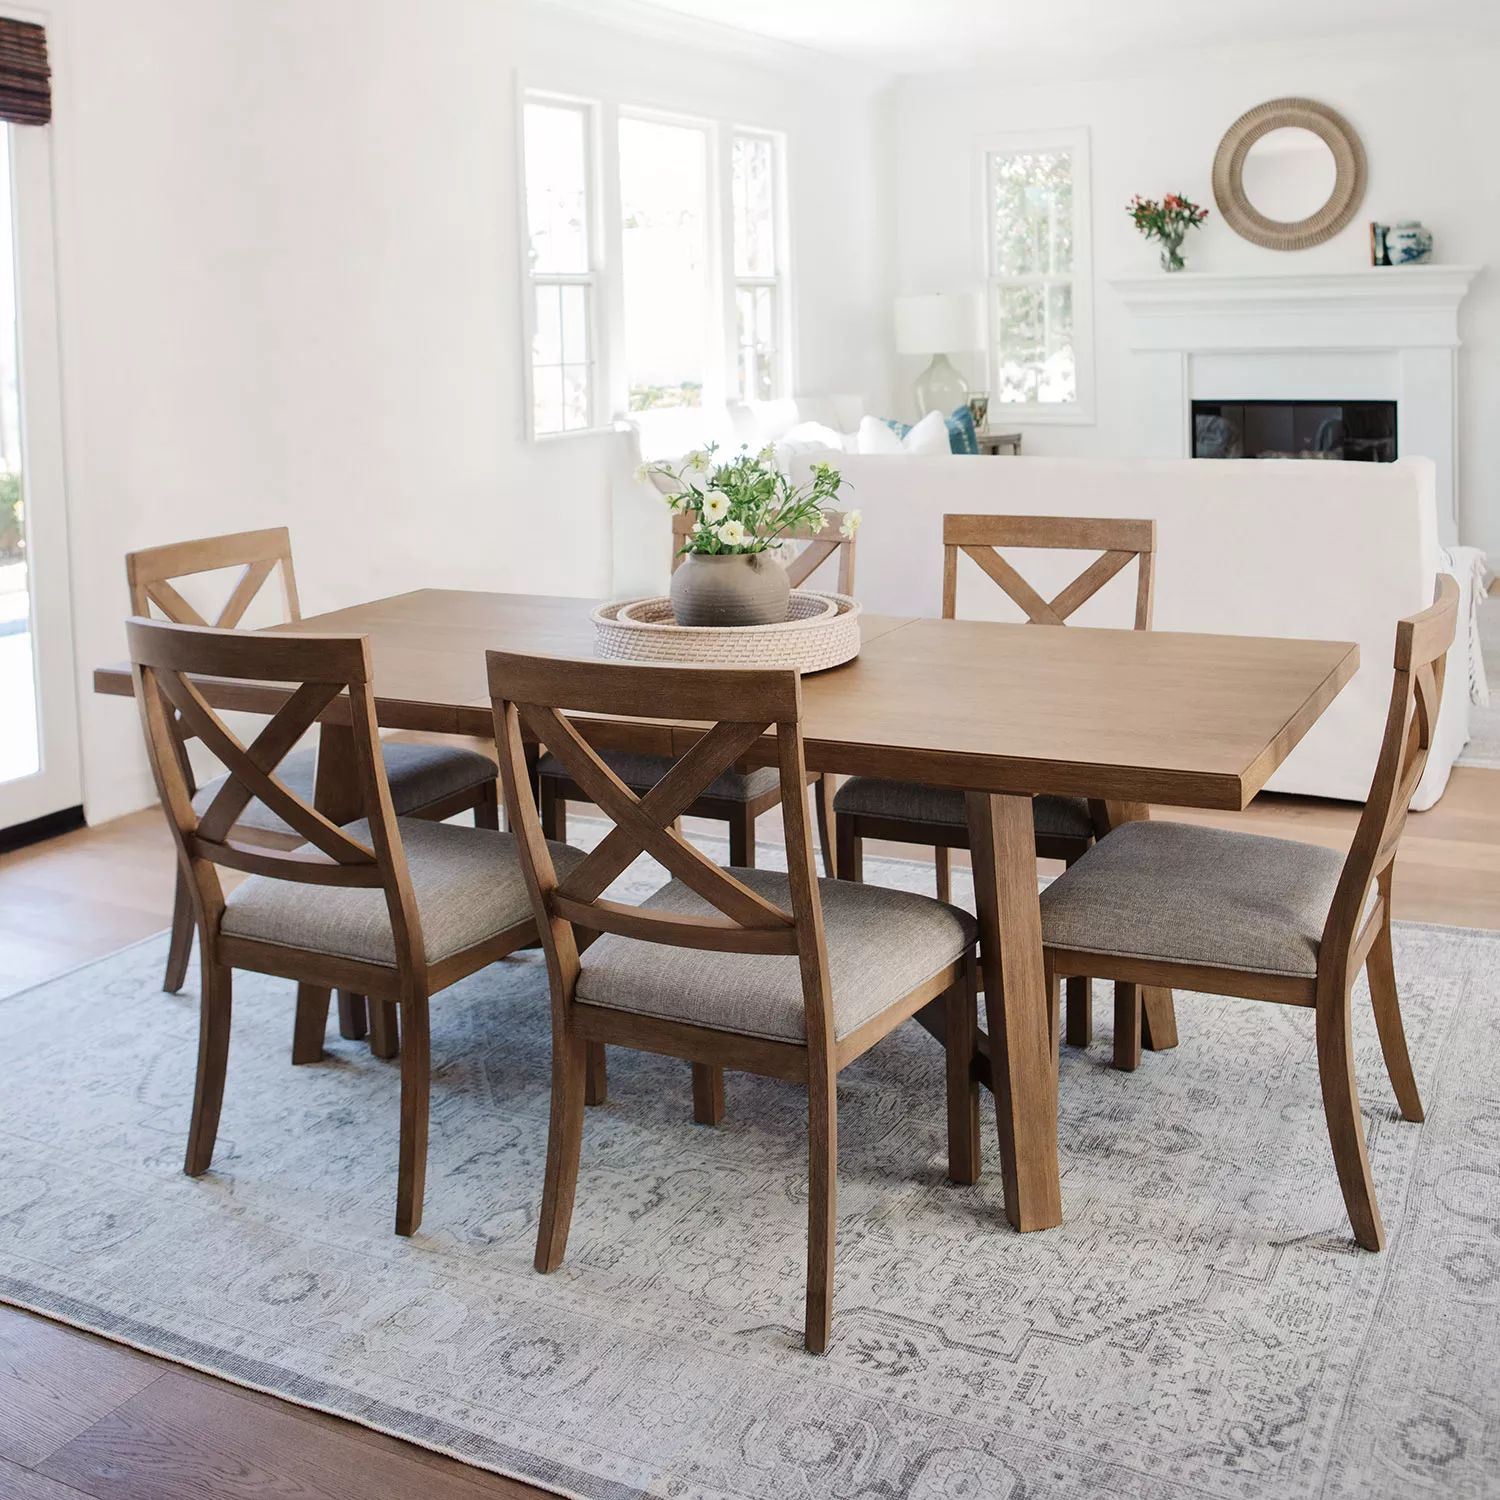 details by Becki Owens Ren 7-Piece Expandable Dining Set, Distressed Natural Wood Finish | Sam's Club